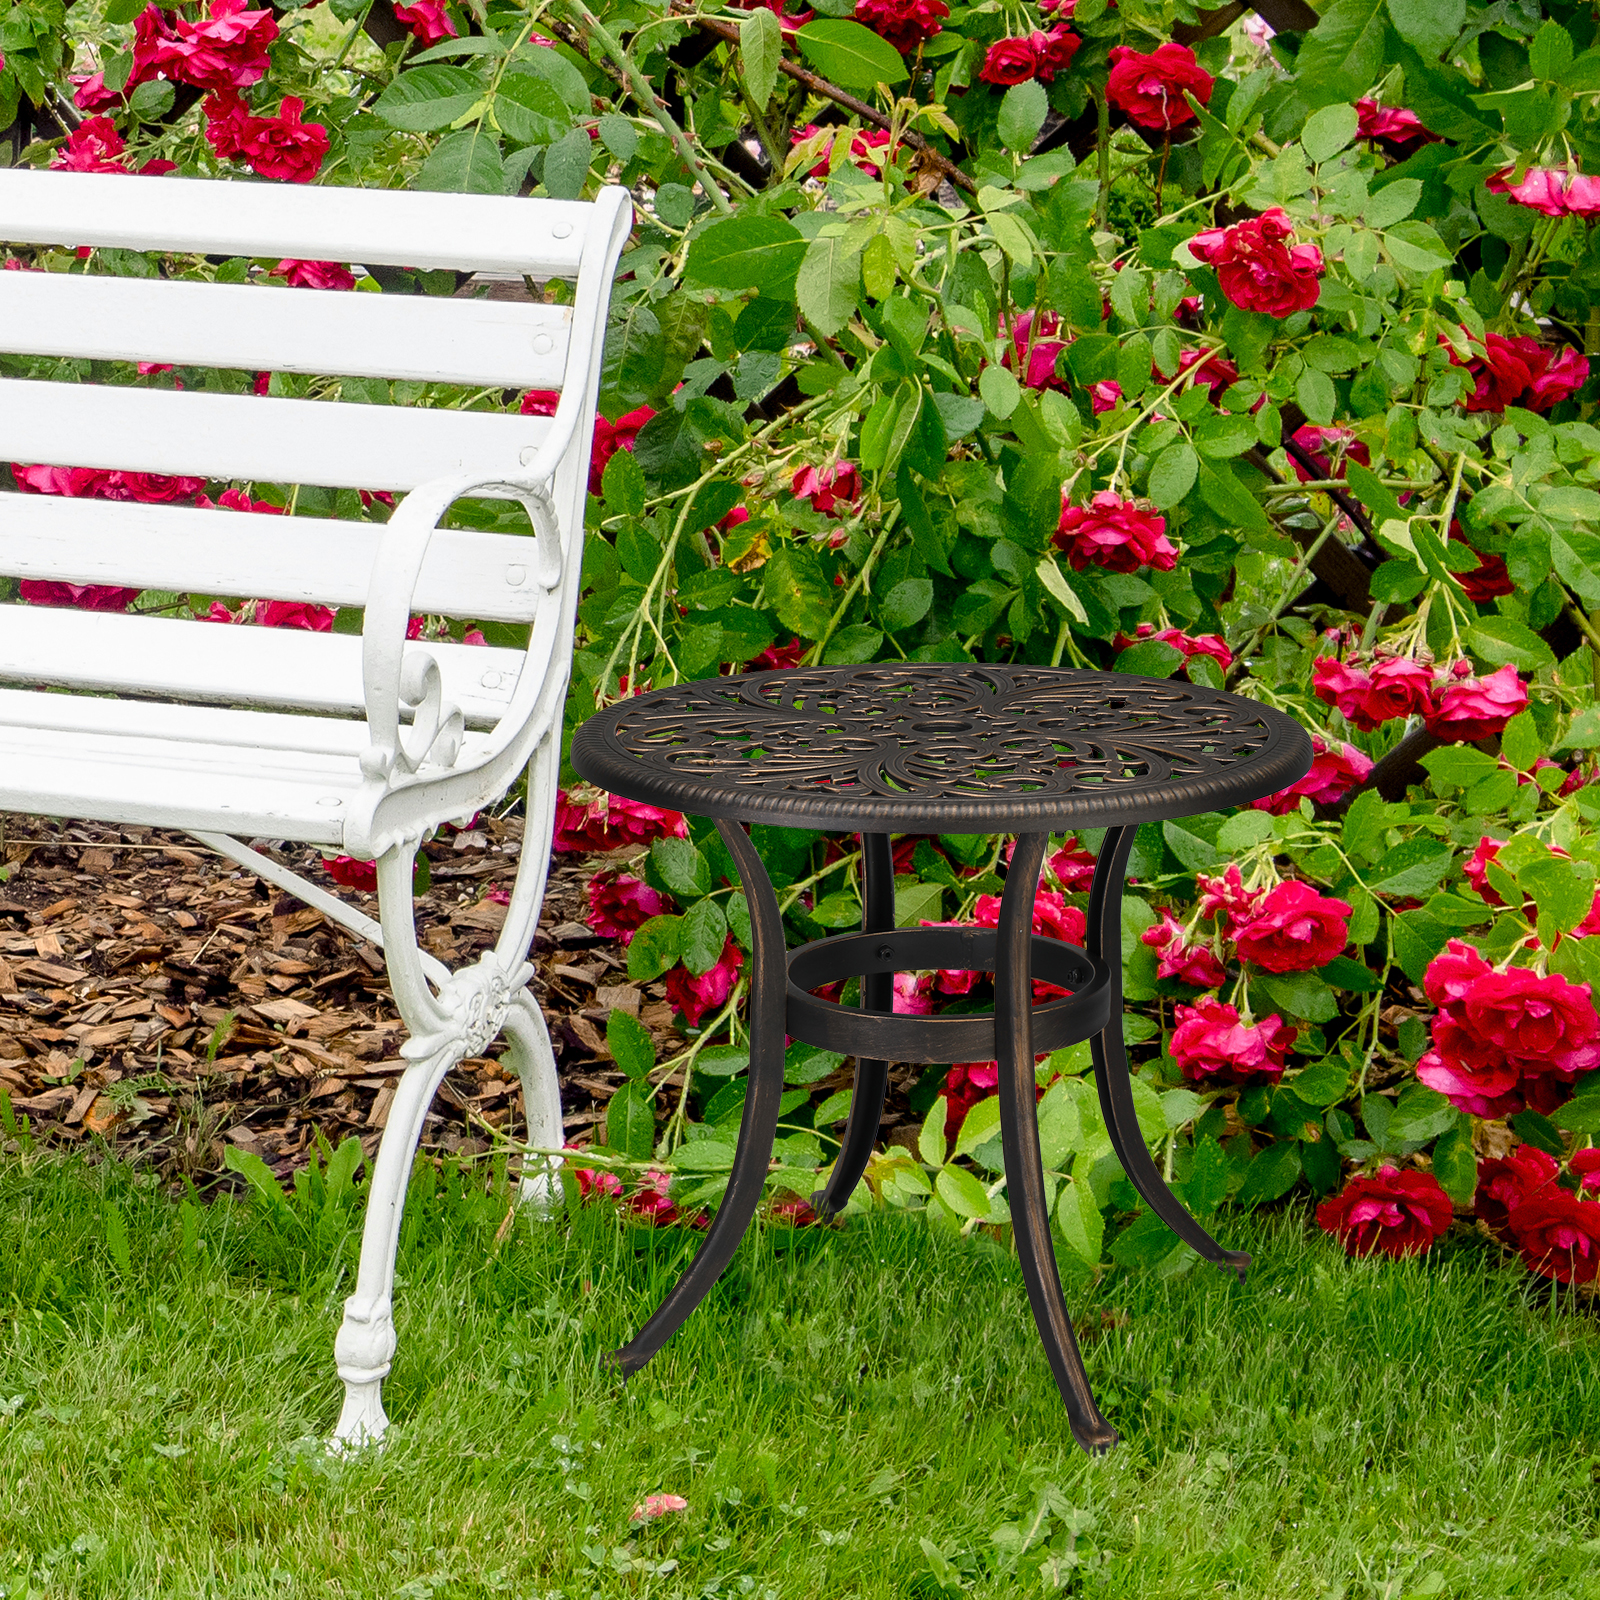 White,Romantic,Style,Park,Bench,In,Lush,Colorful,Blossom,Rose